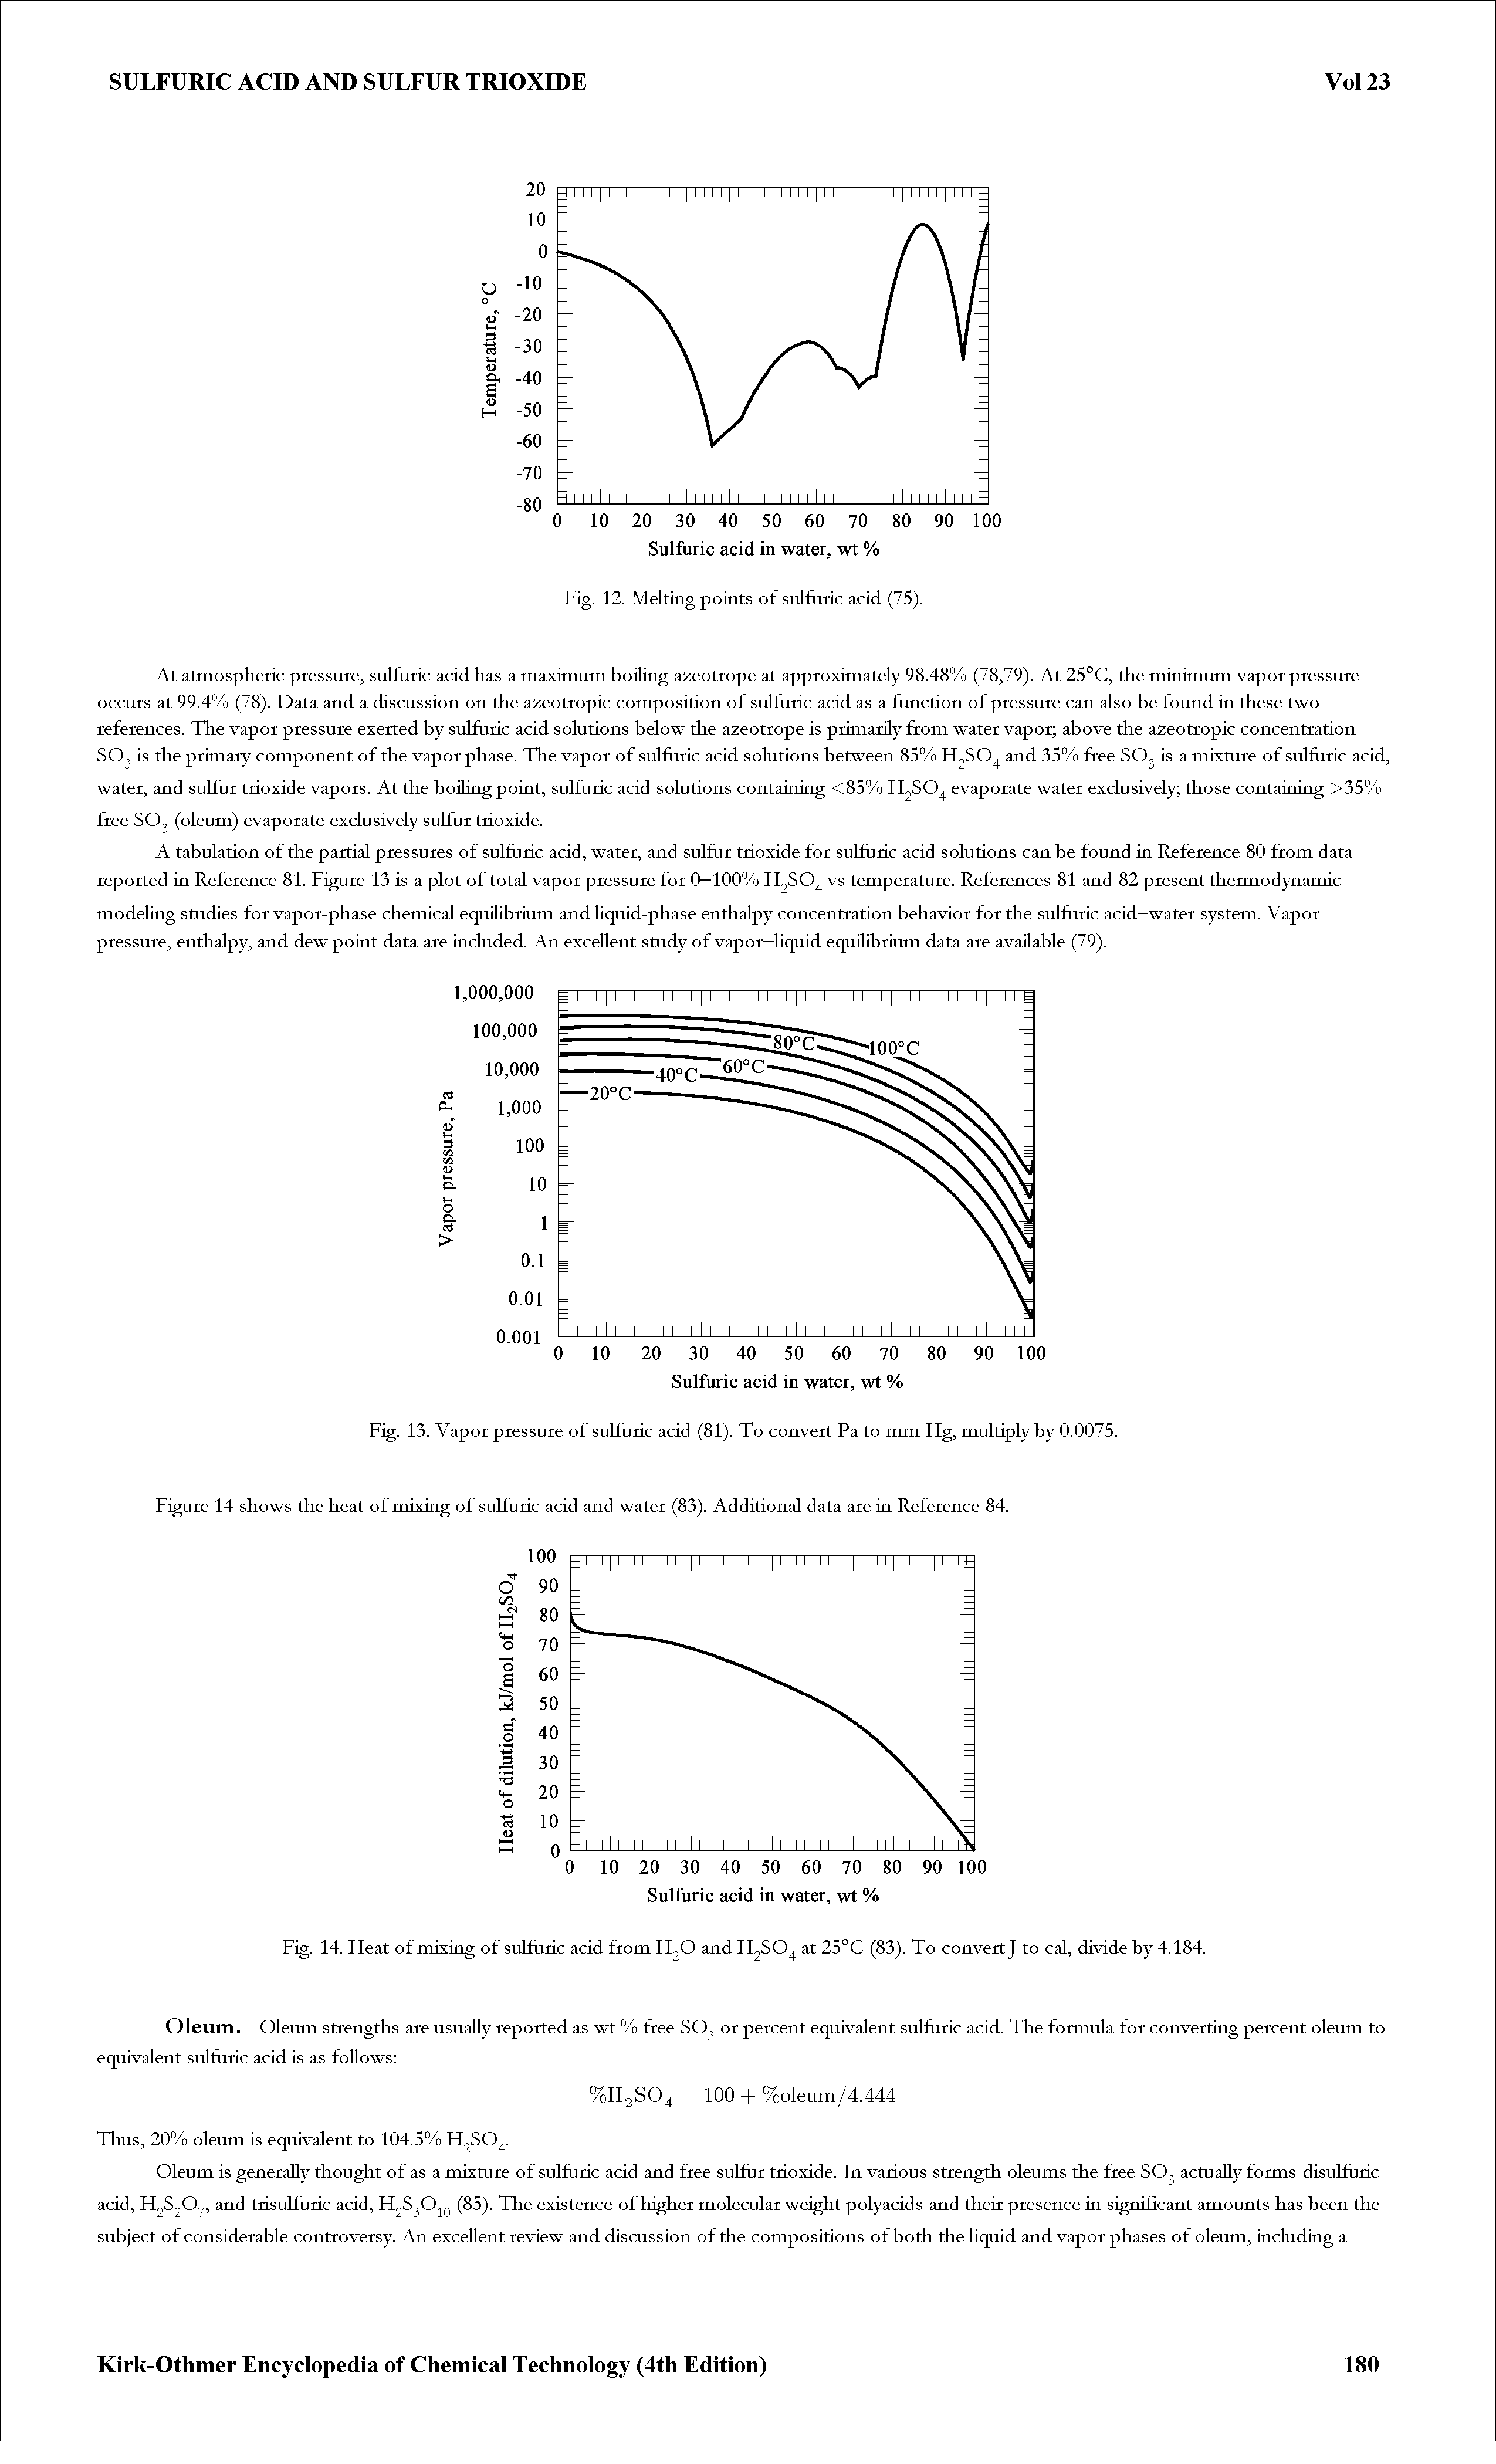 Fig. 14. Heat of mixing of sulfuric acid from H2O and H2SO4 at 25°C (83). To convert to cal, divide by 4.184.